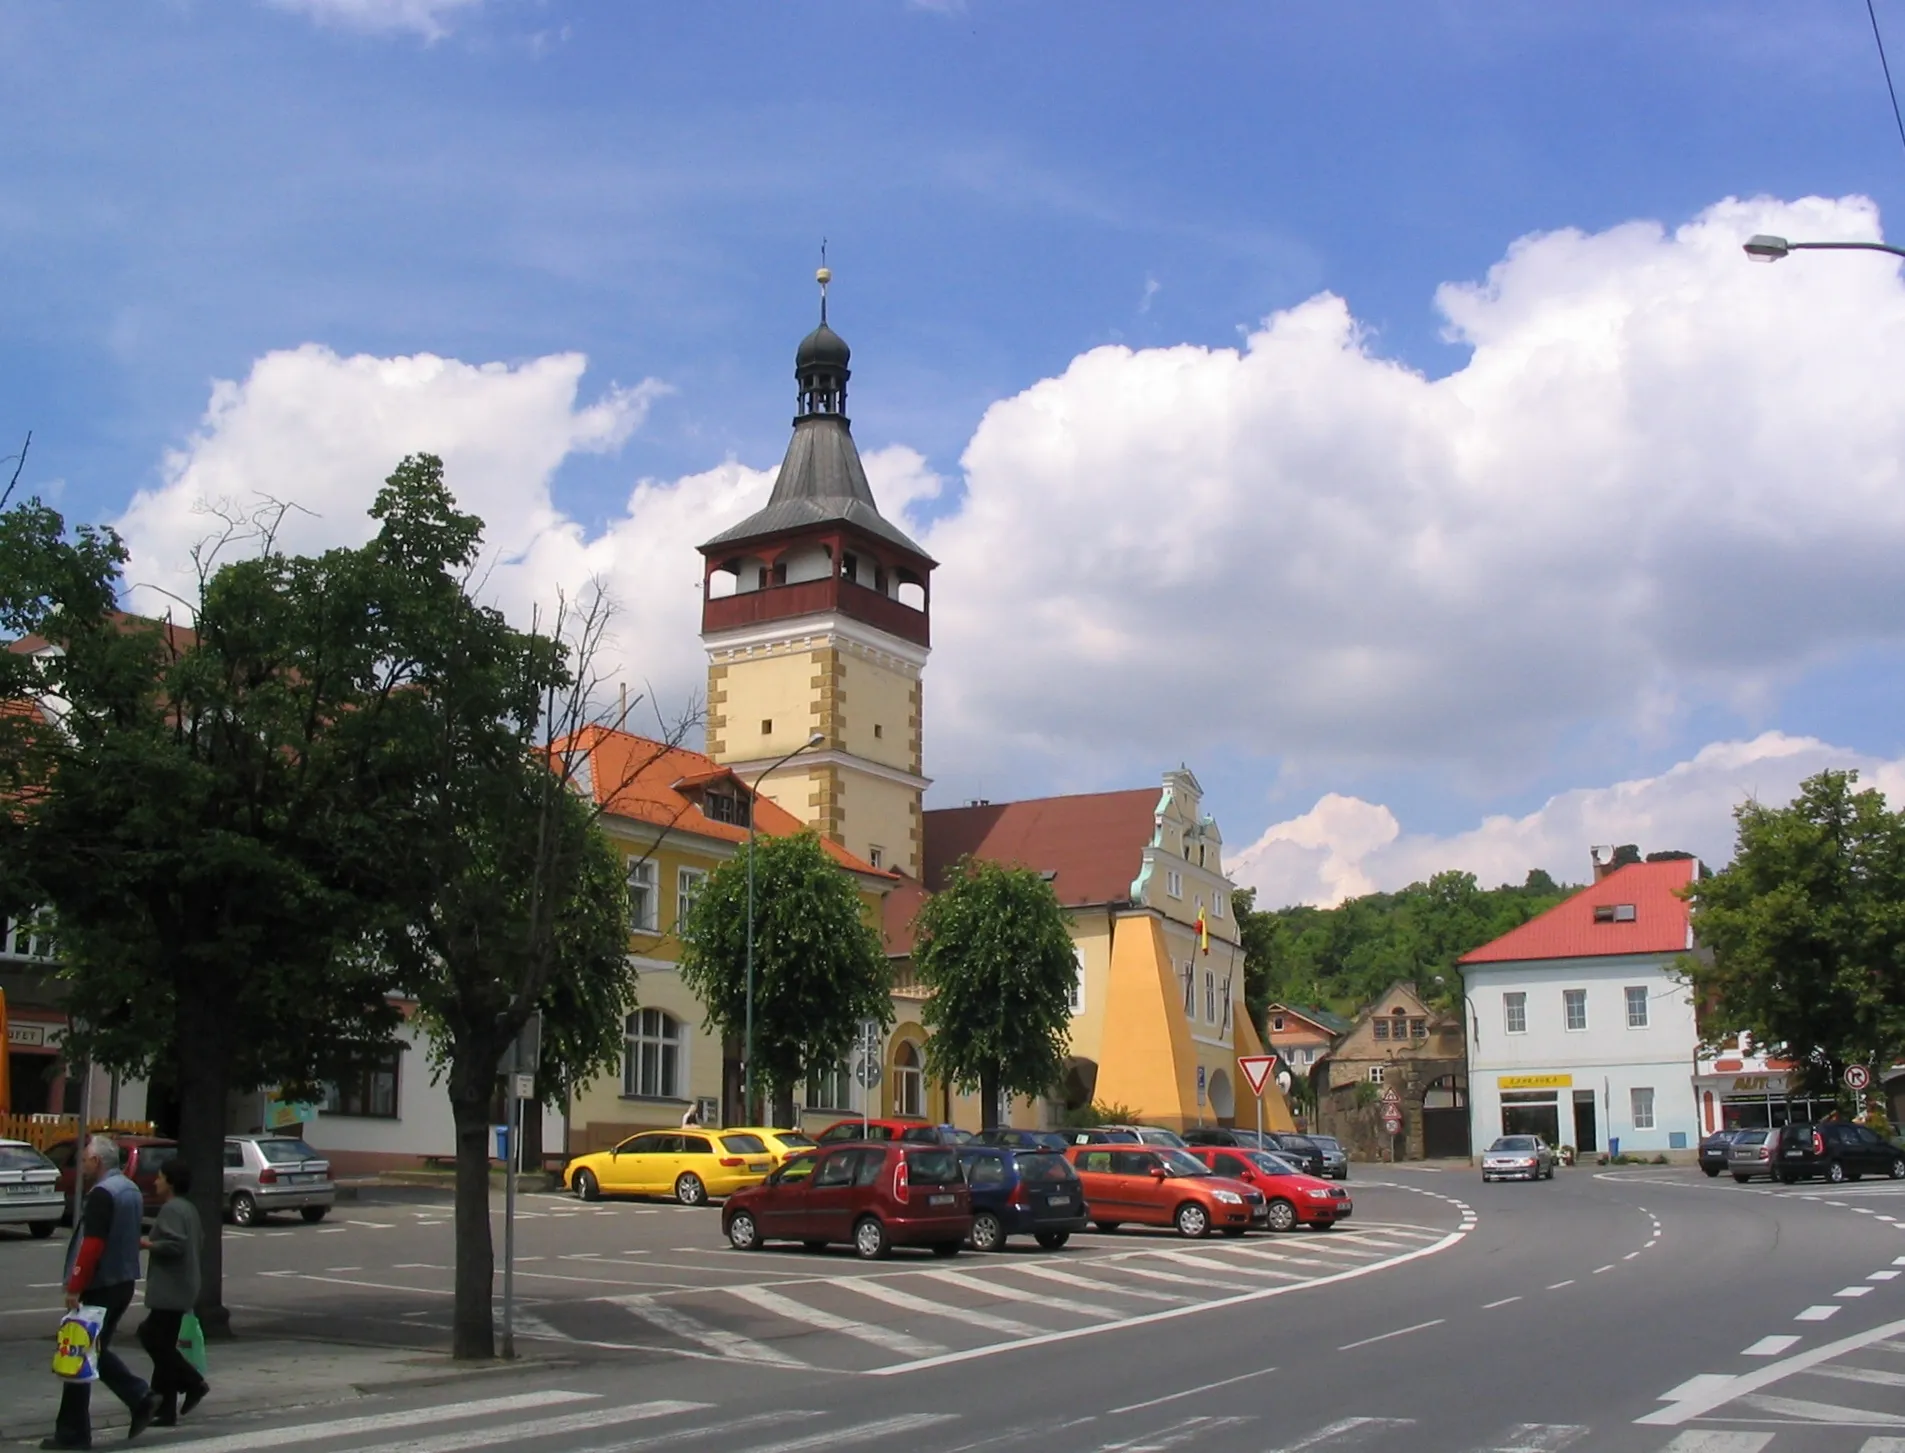 Photo showing: Town of Dobrovice, Czech Republic, market place